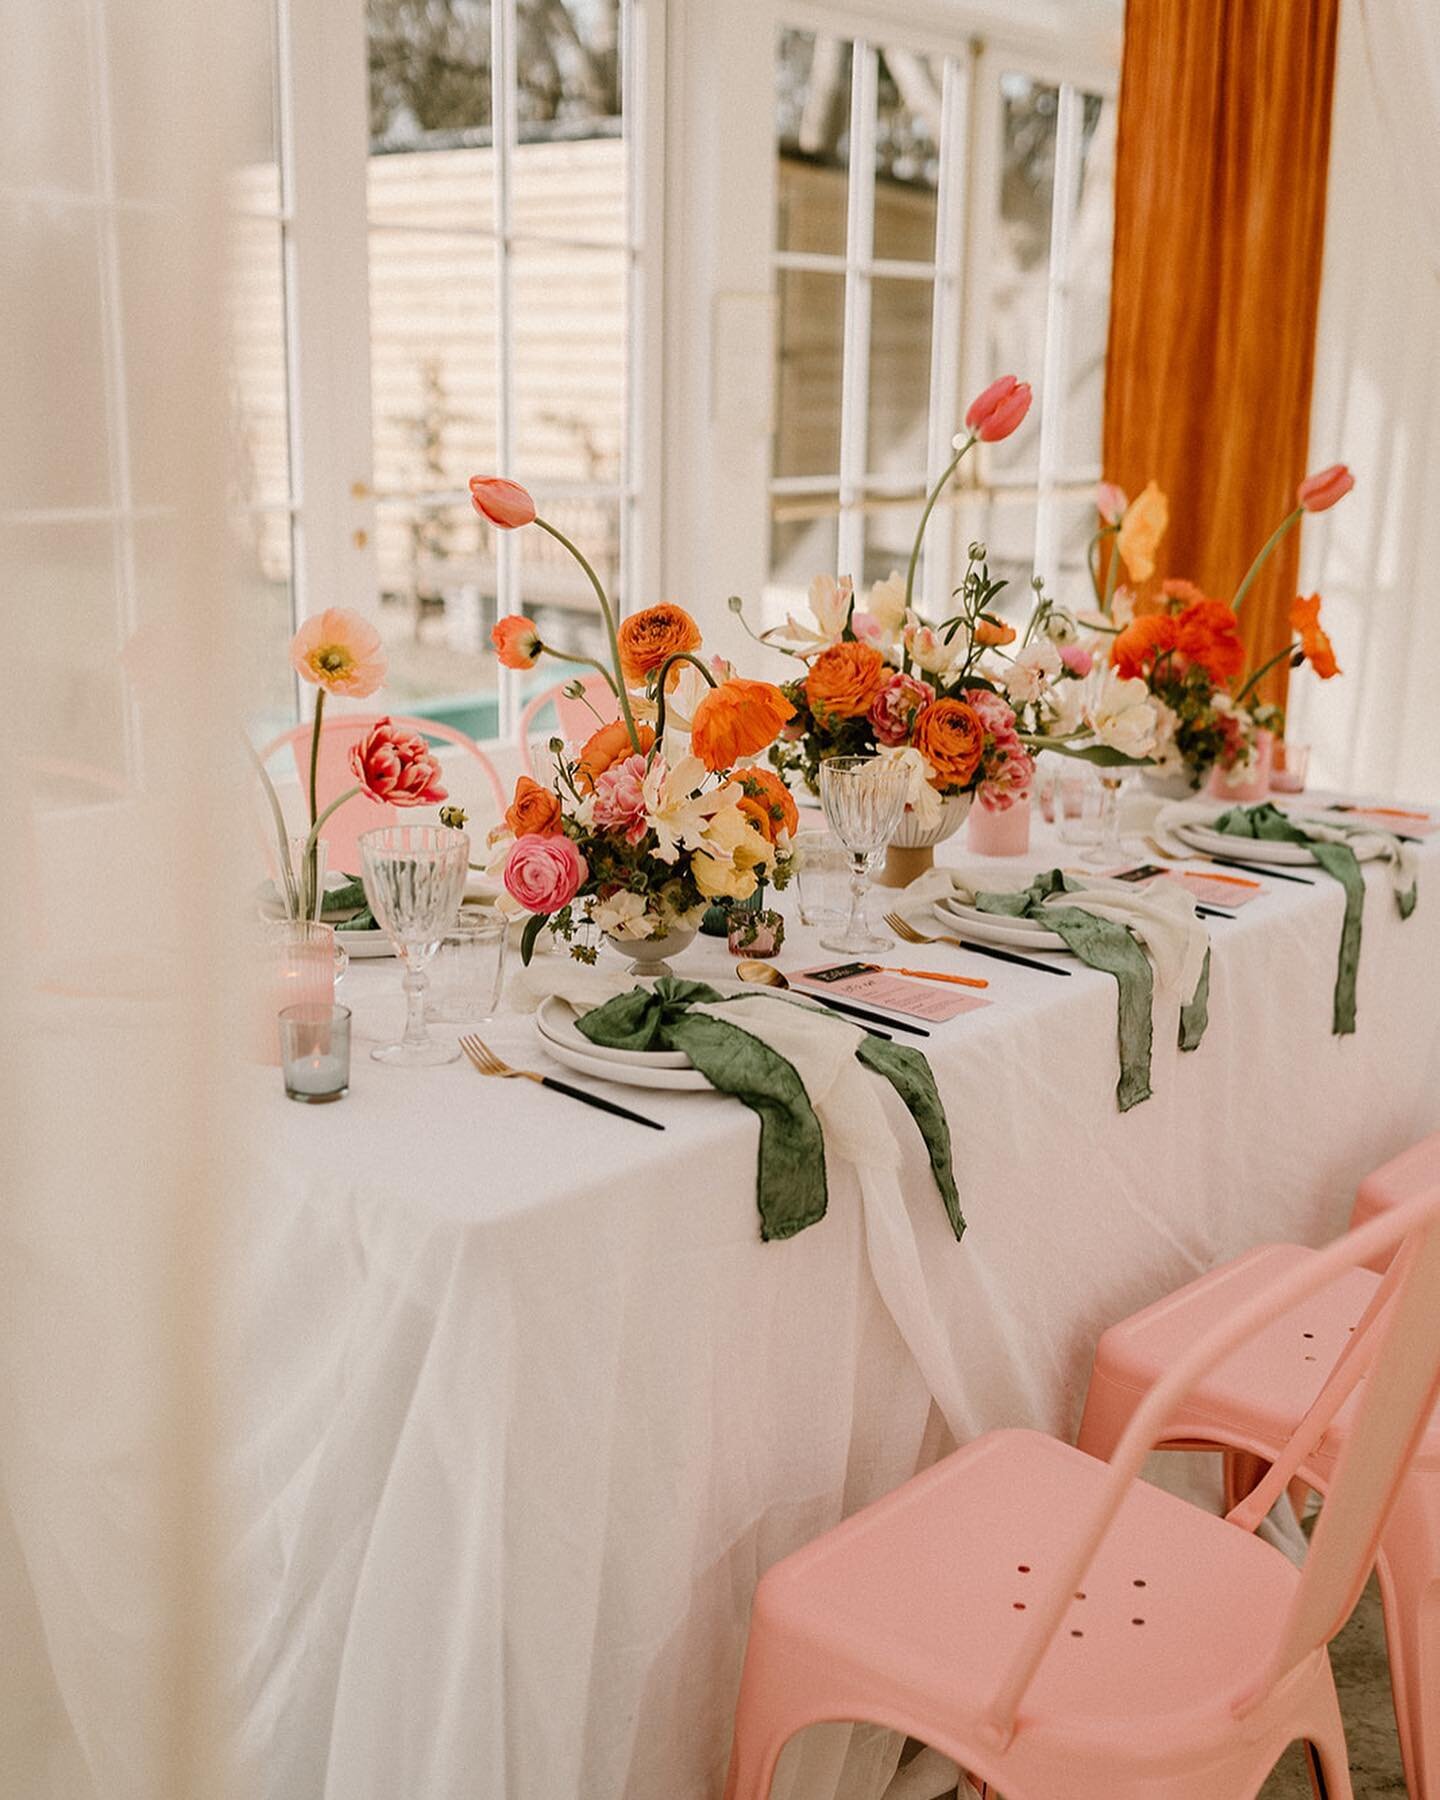 More Spring poppies from this shoot. My first with @abstracteventsuk. Love creating with you! 🌸 

The Dream Team 🌸:
Concept, planning &amp; styling: @abstracteventsuk 
Venue: @haynehouseweddingvenuekent
Photographer: @amywoodham_photography 
Videog